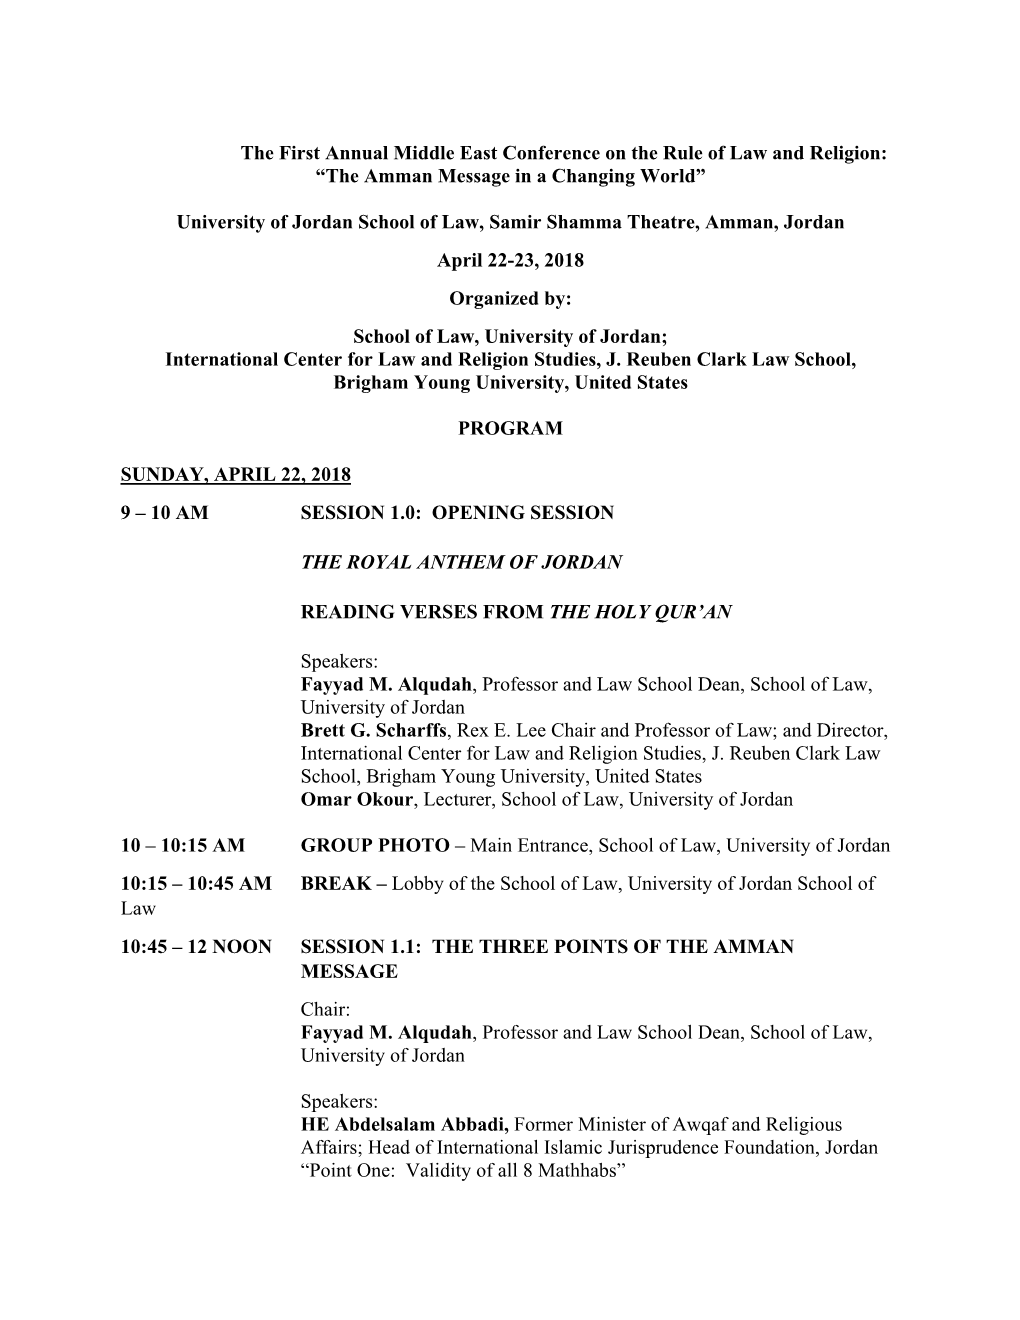 The First Annual Middle East Conference on the Rule of Law and Religion: “The Amman Message in a Changing World” University